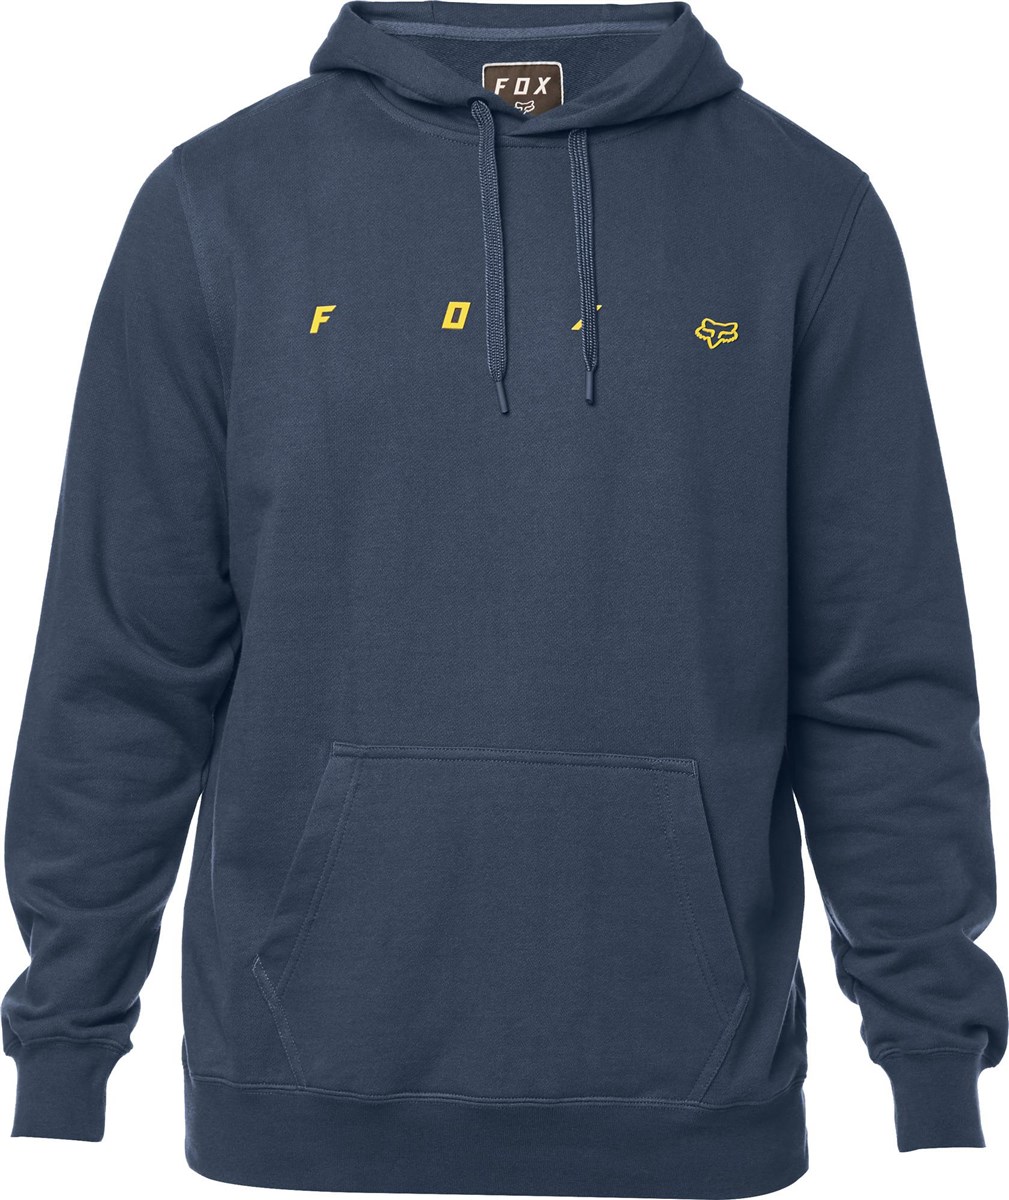 Fox Clothing Maxis Pullover Fleece / Hoodie product image